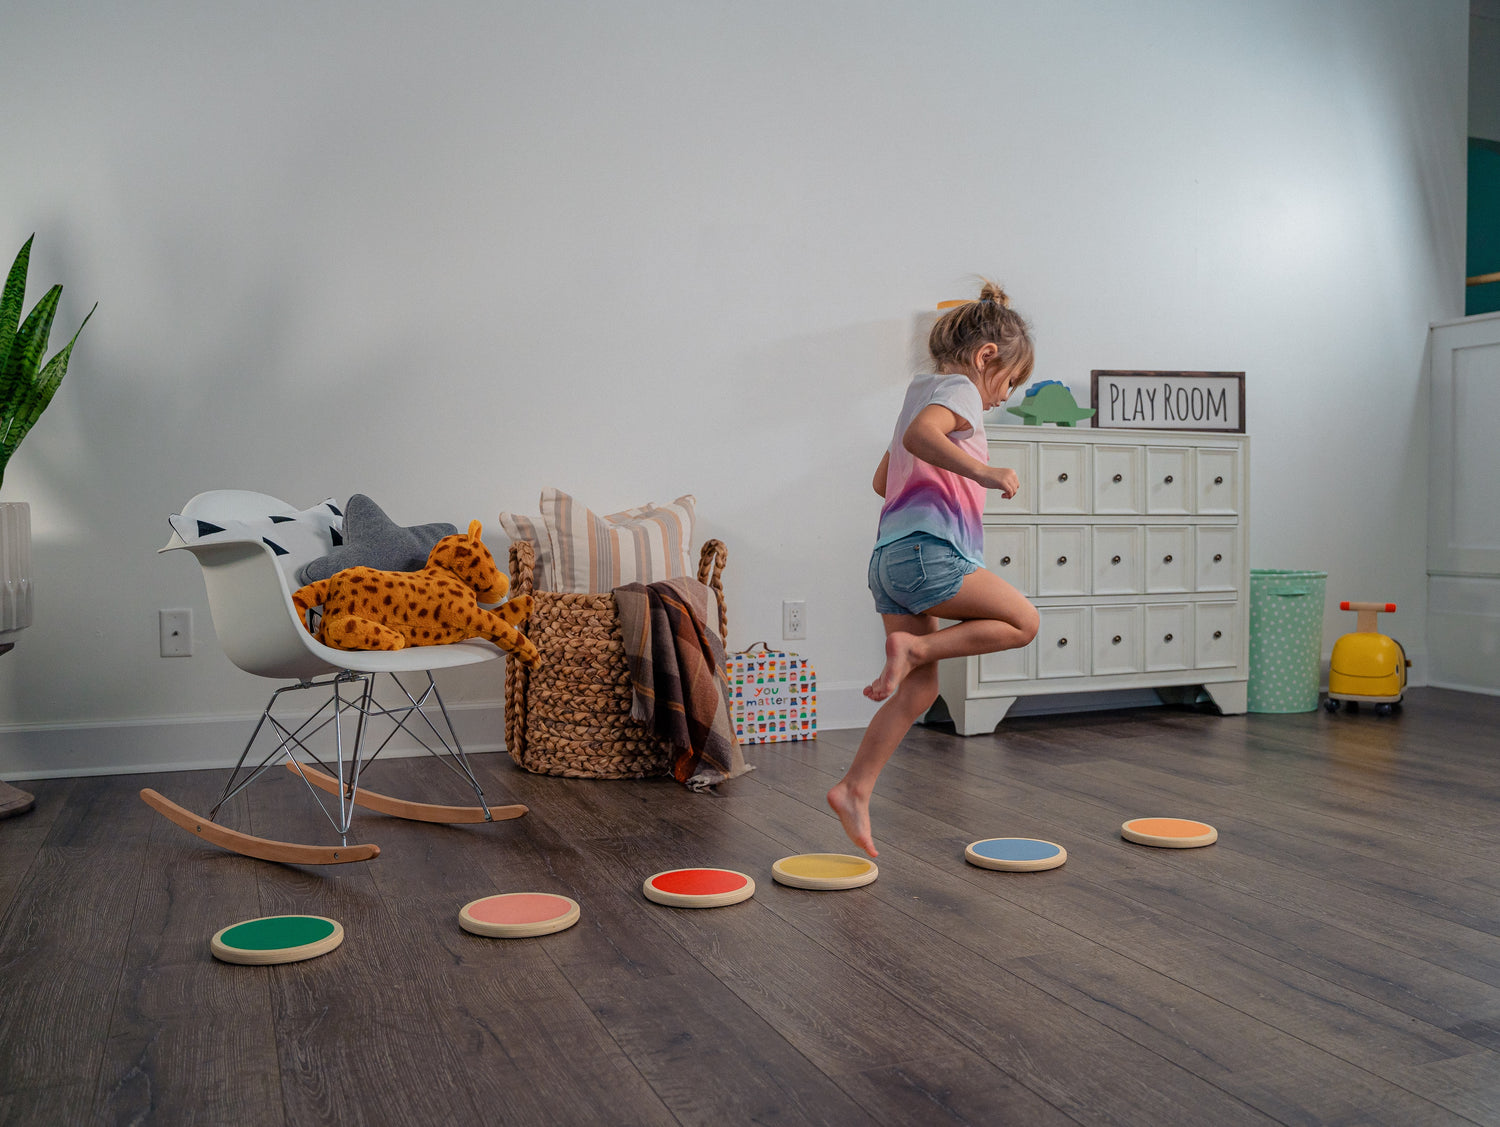 Girl in Playroom Playing on Hopper - Avenlur's Set of 6 Stepping Stones for Kids Made from Natural Birchwood